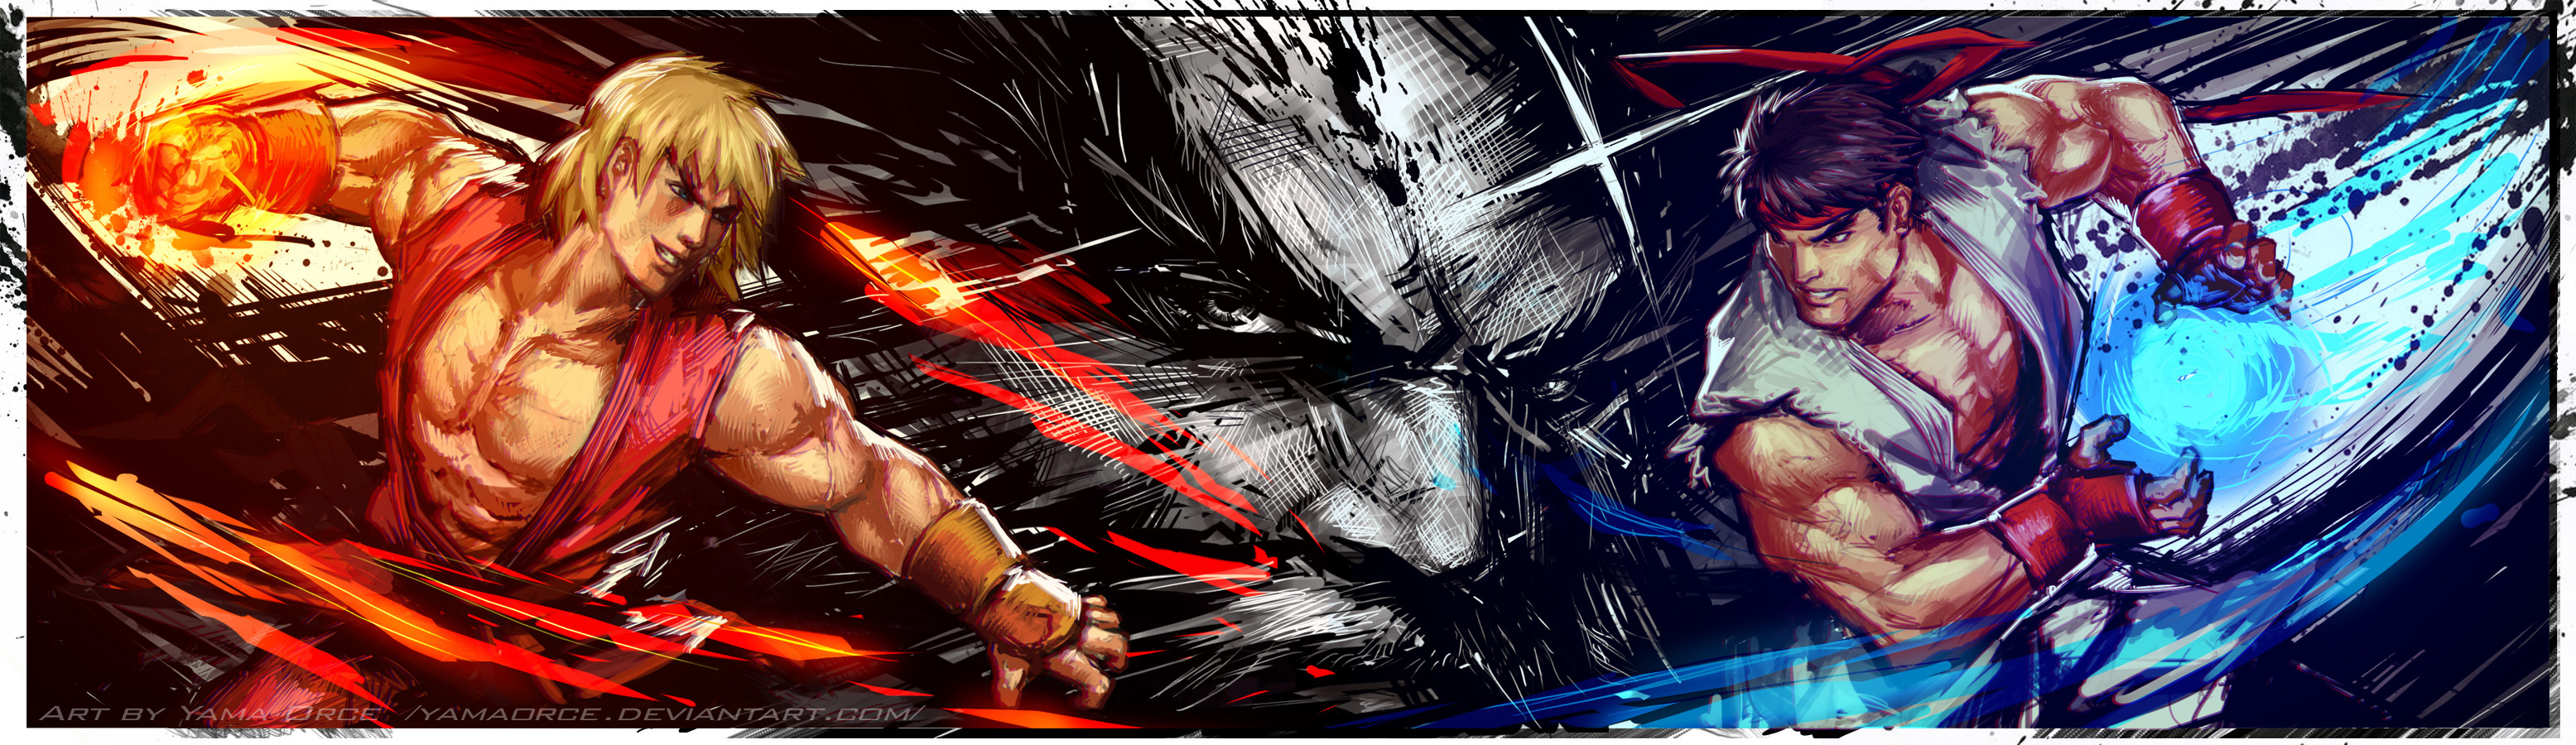 Street Fighter IV Wallpapers